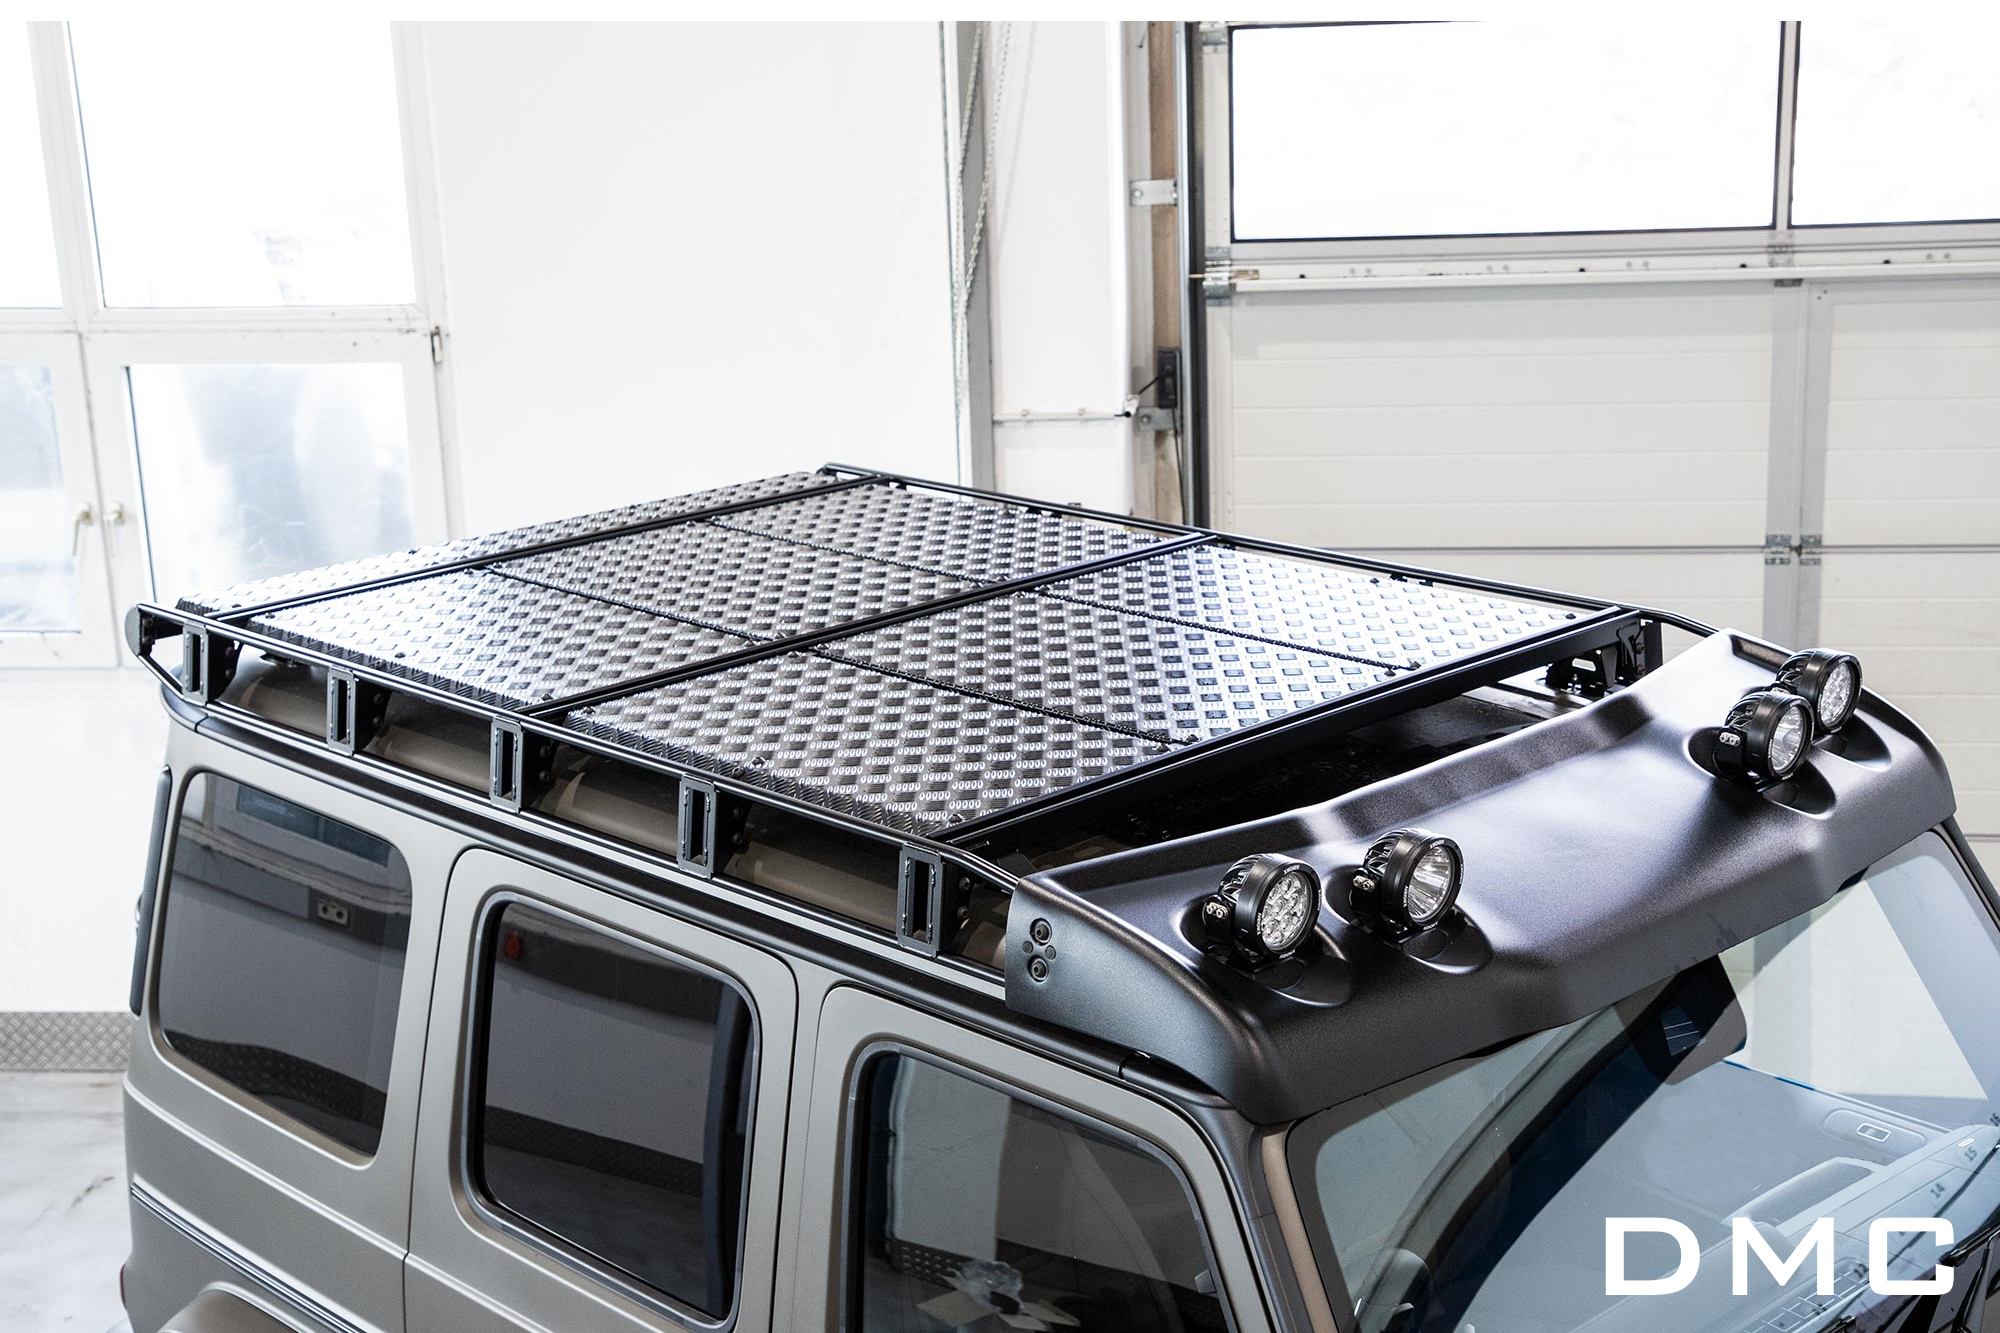 Mercedes Benz G Class W463A W464 AMG G63 G550 Adventure Flat Roof Plate Kit  fits OEM Roof of the LHD & RHD Right Hand Drive G Wagon Models - DMC